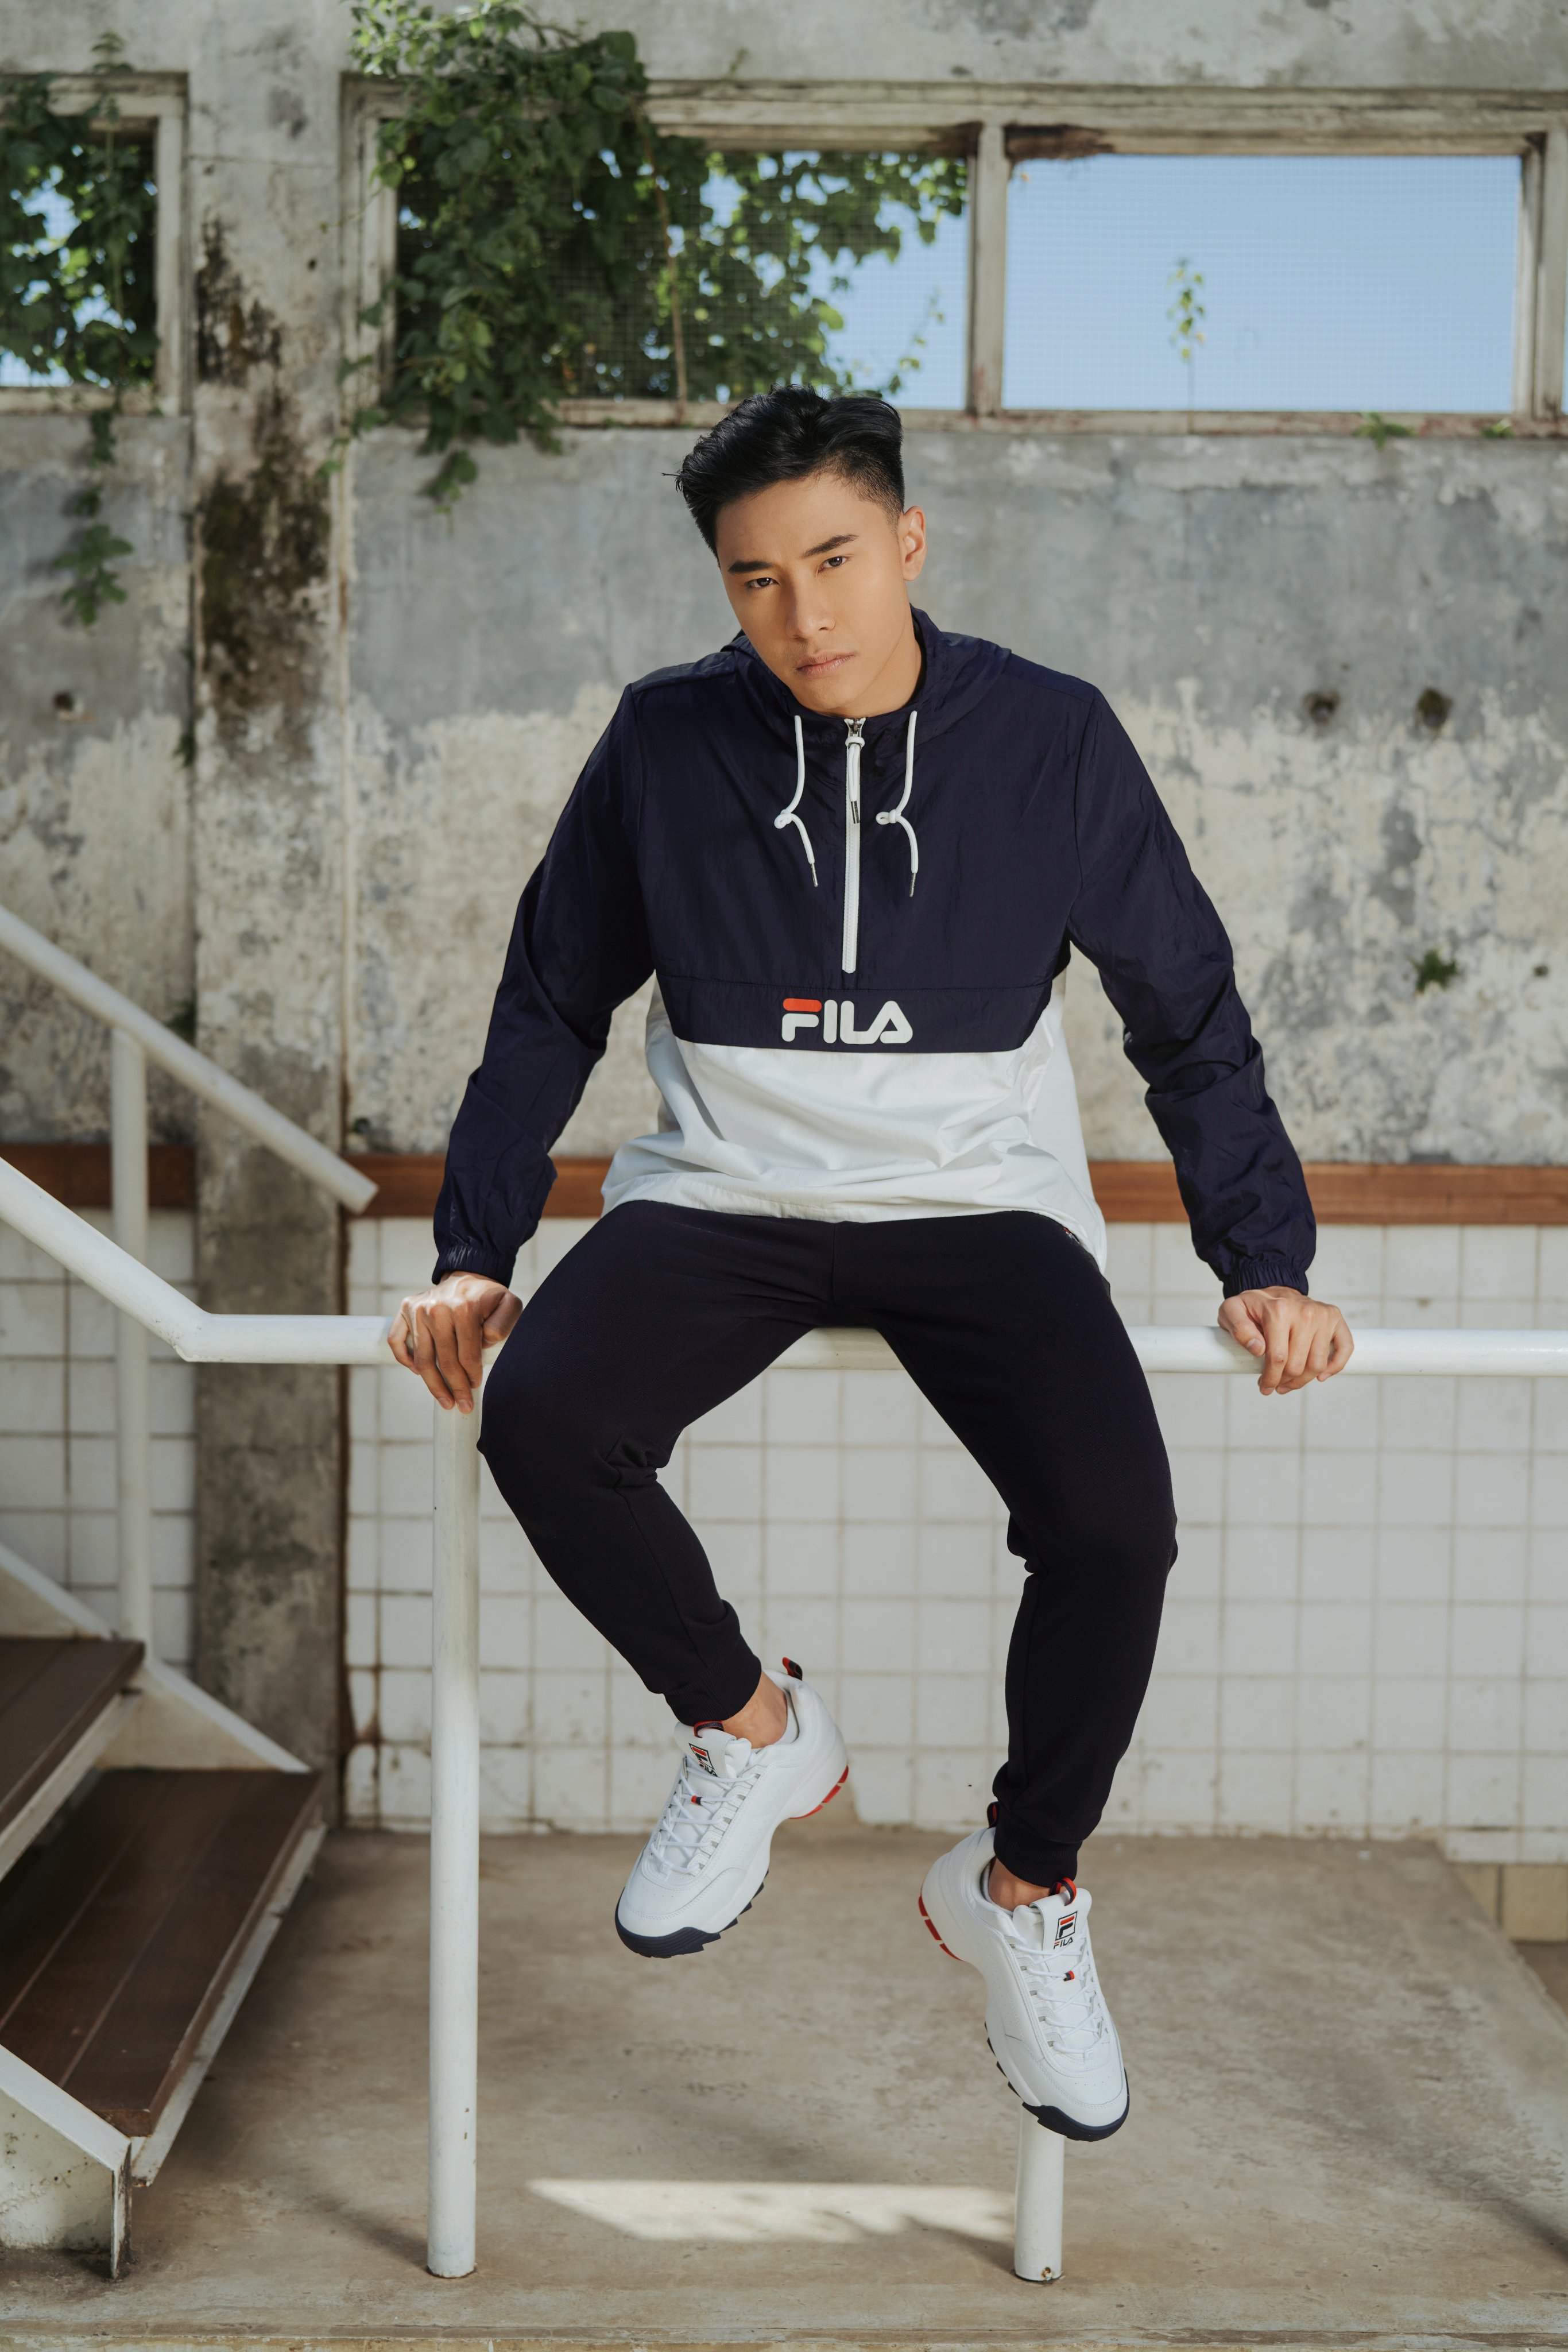 FILA Indonesia on Twitter: "Get your sporty look with Klein Jacket, and combine with Disruptor Duo. Now available at FILA Indonesia e-commerce sites, offline store, our official and SHOP FROM